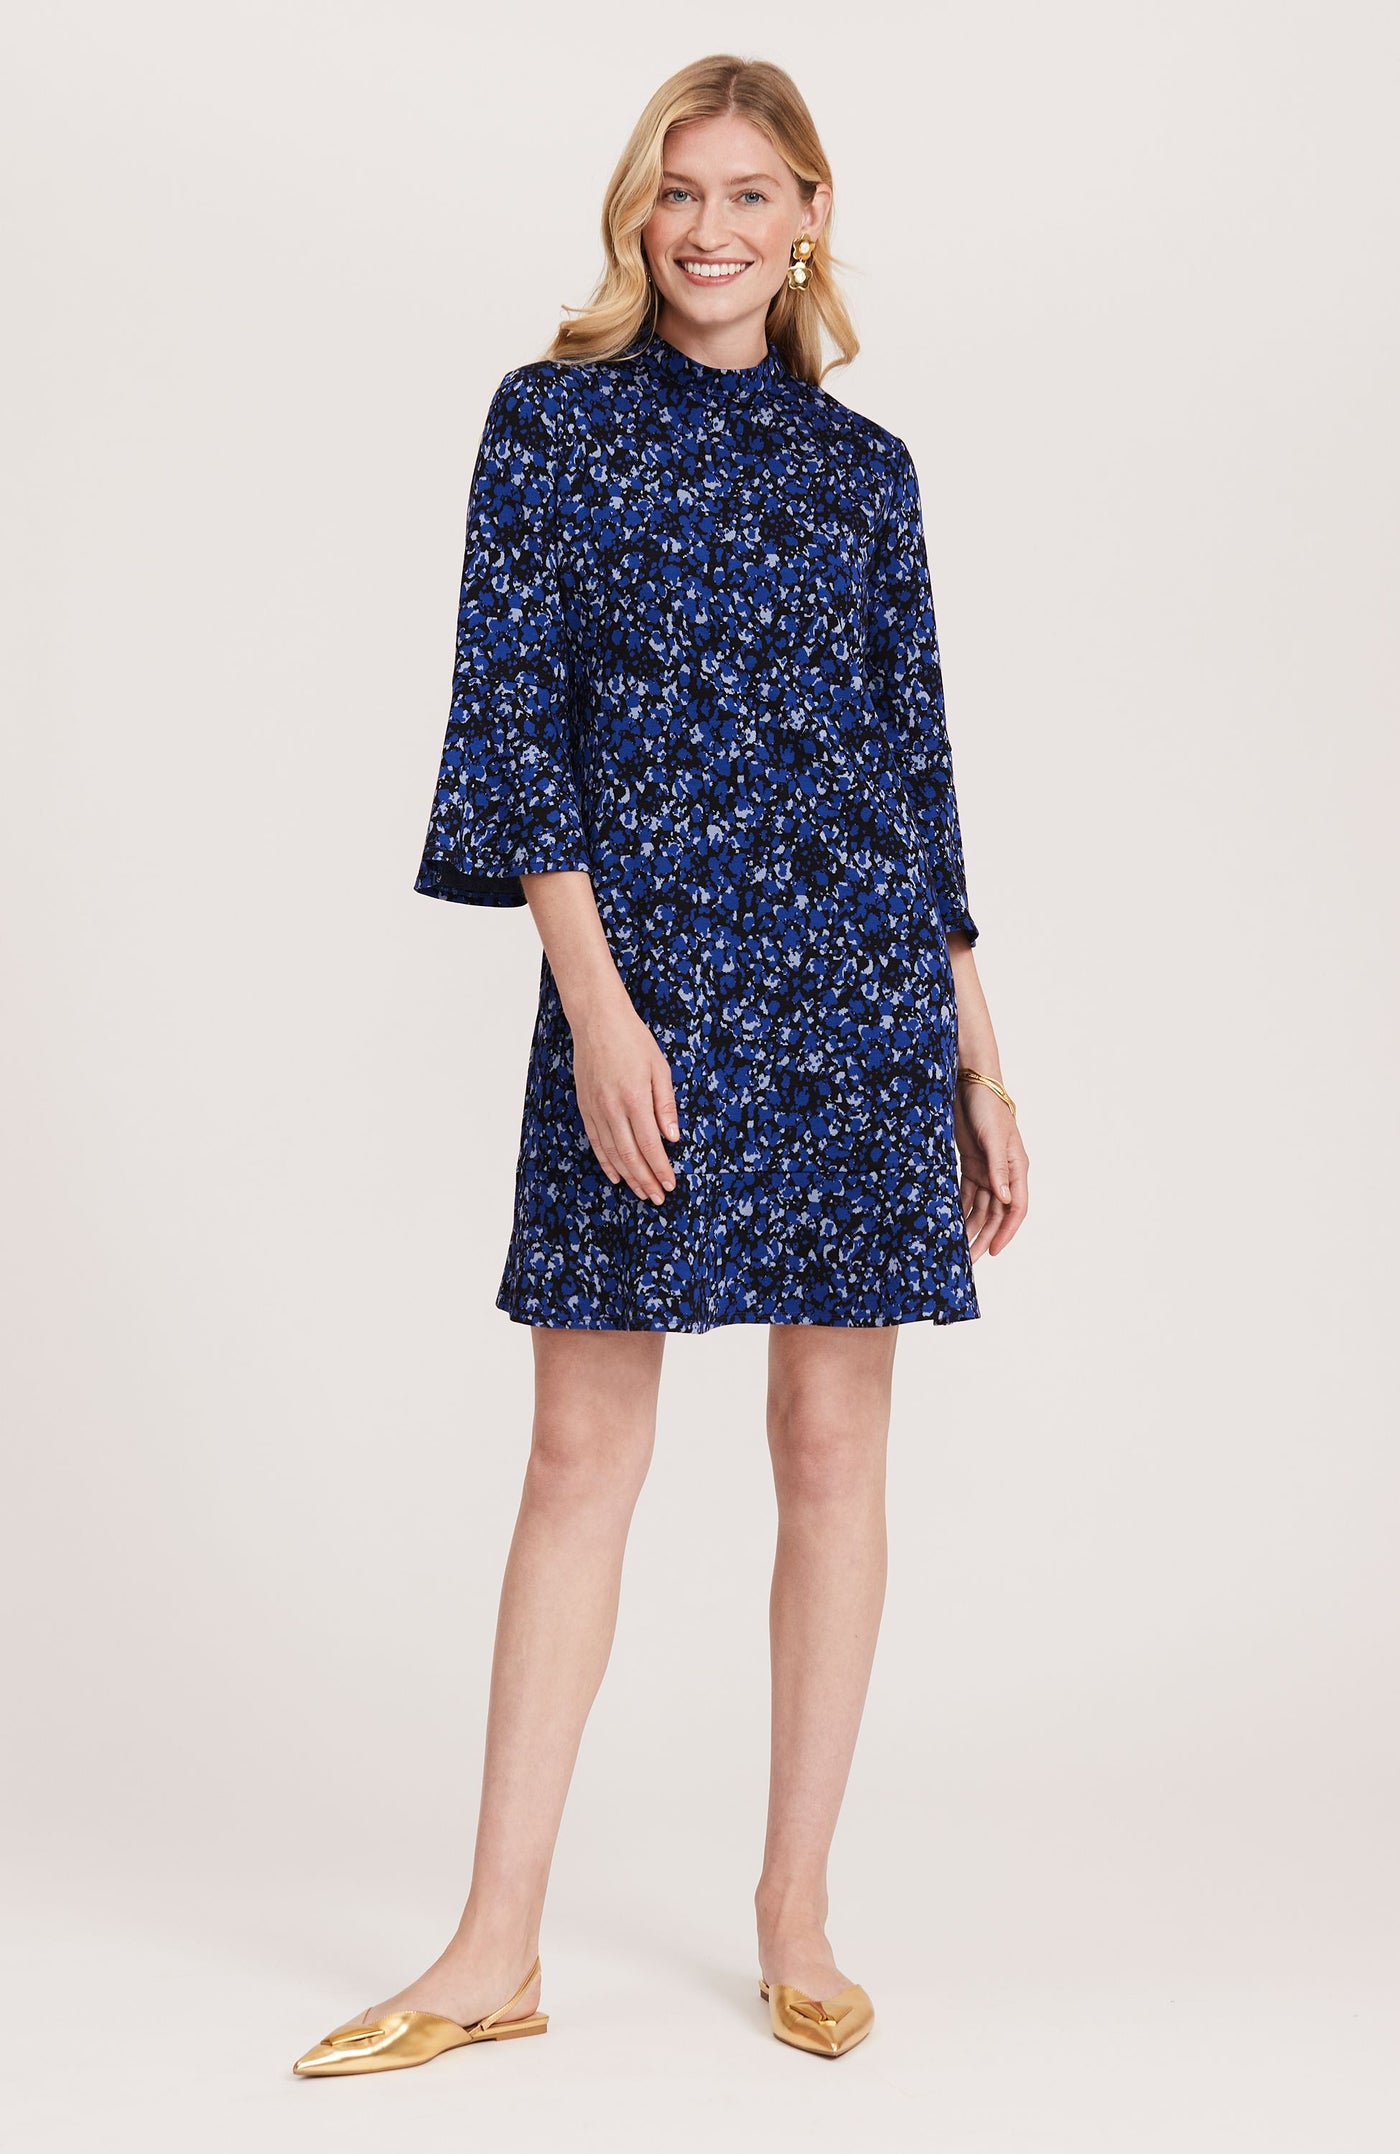 Mindy Jacquard Dress, Abstract Floral